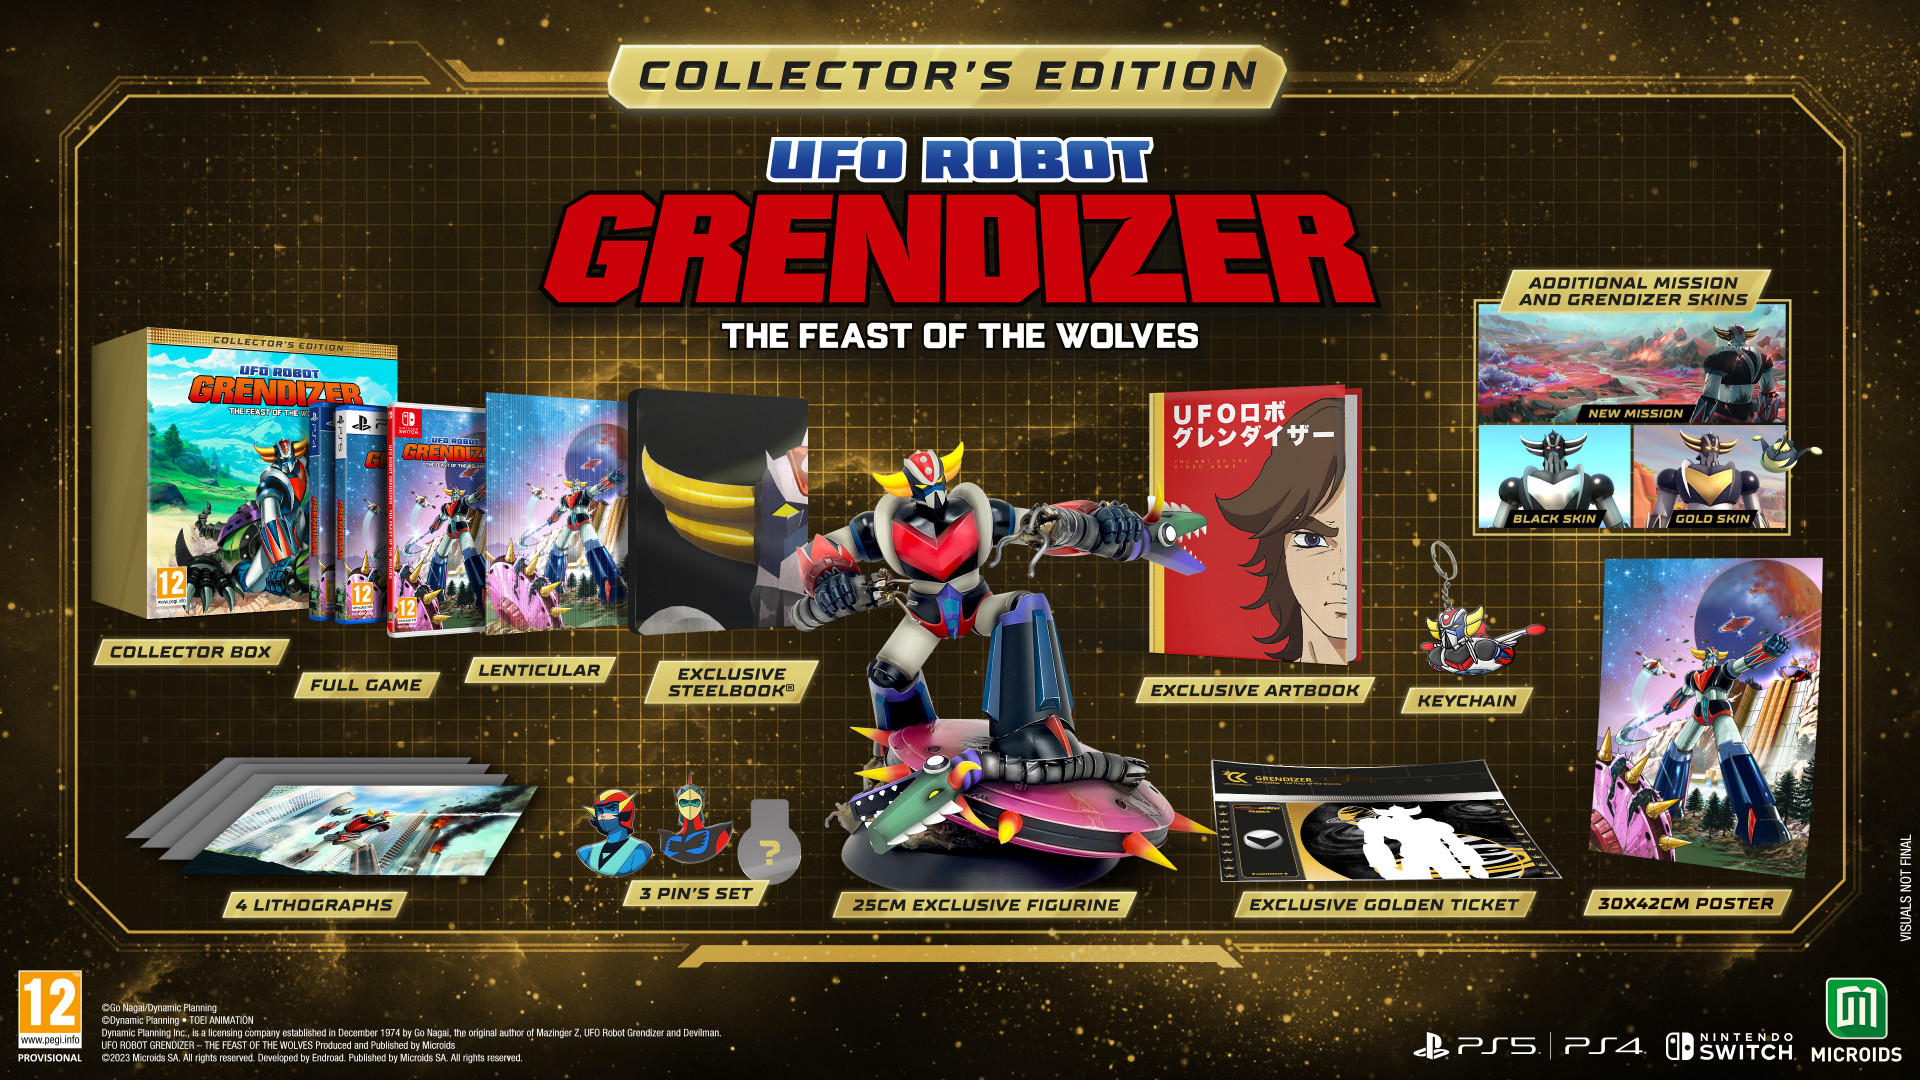 UFO Robot Grendizer: The Feast of the Wolves - Collector's Edition (PS4), Microids